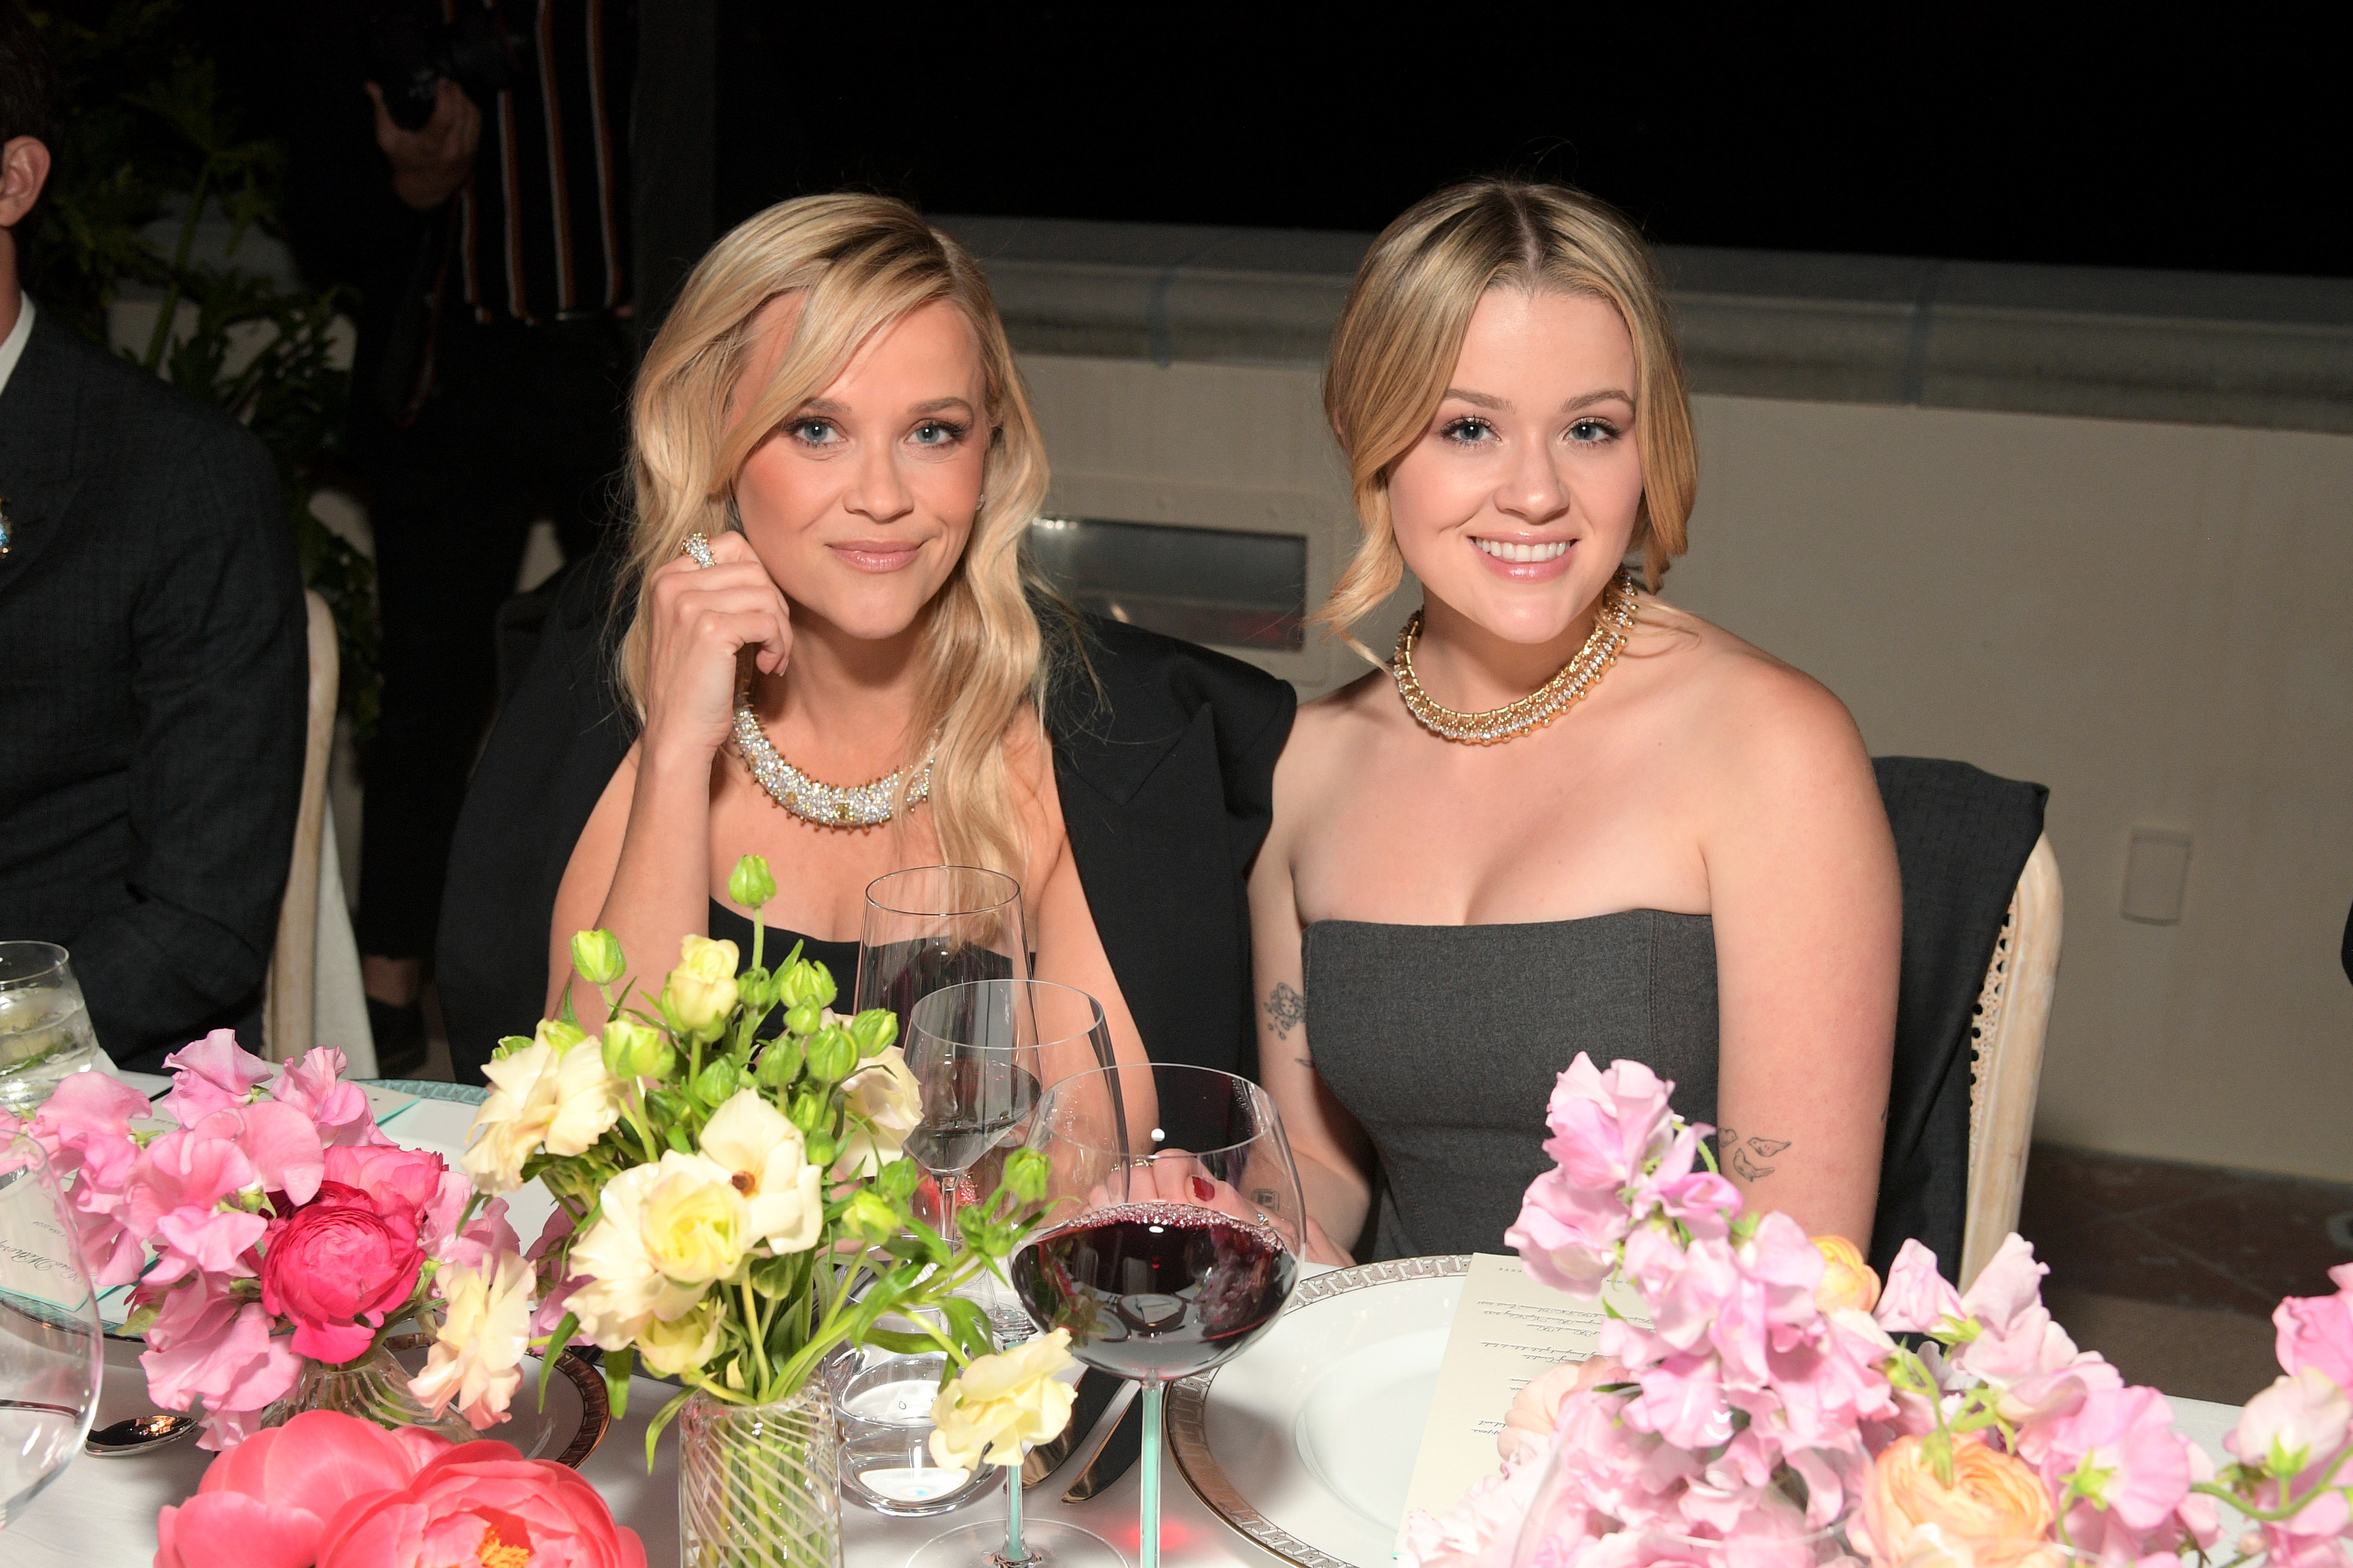 Reese and Ava sat down at a table surrounded by gorgeous flowers during the Tiffany event